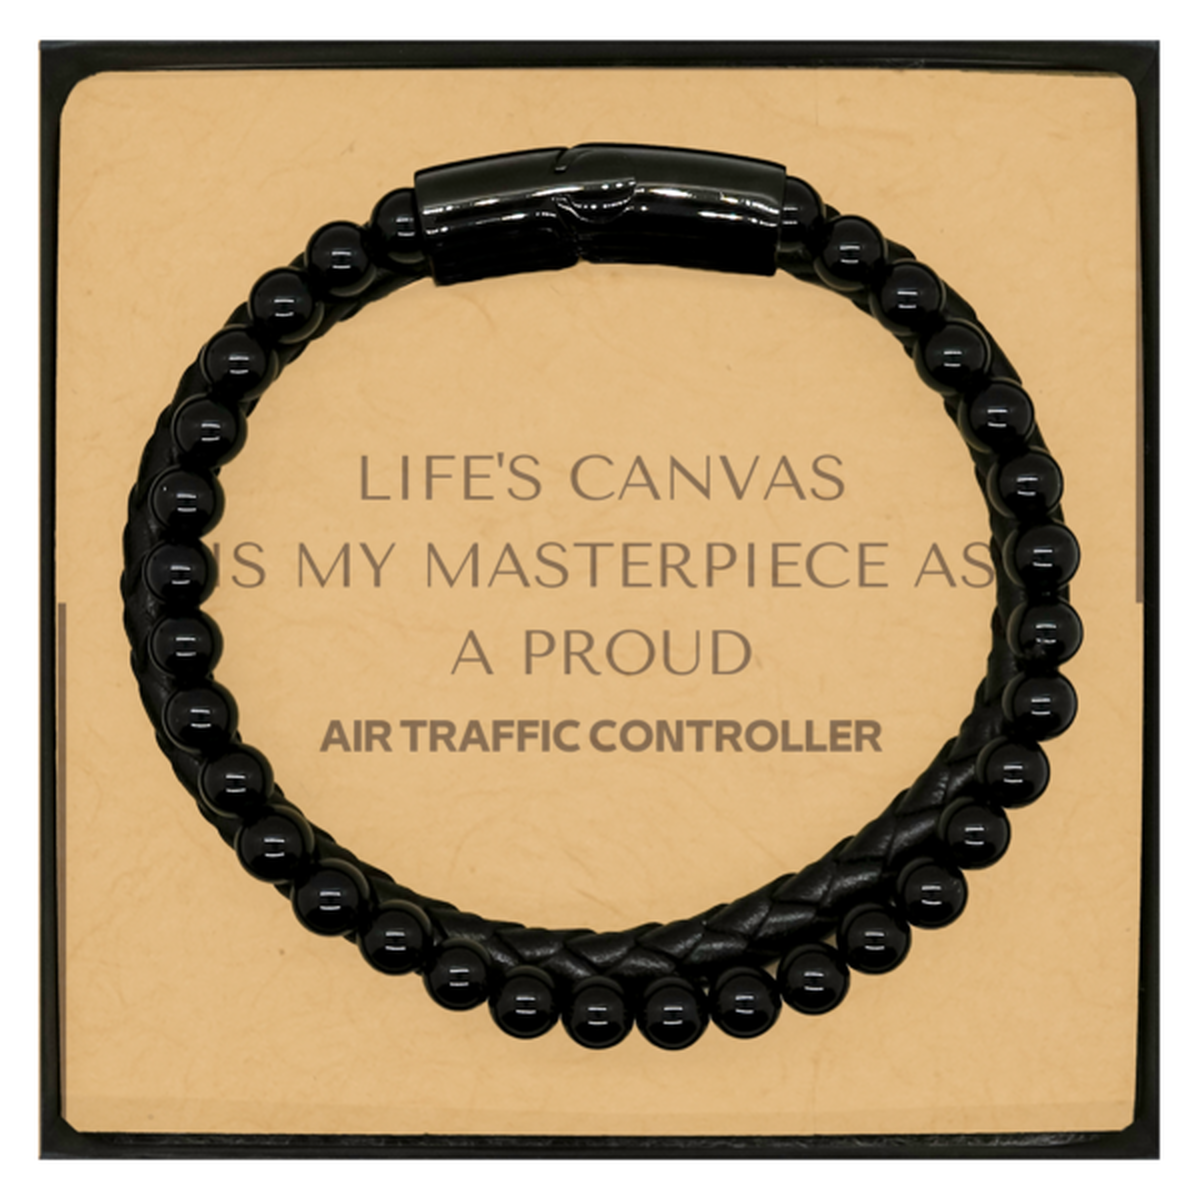 Proud Air Traffic Controller Gifts, Life's canvas is my masterpiece, Epic Birthday Christmas Unique Stone Leather Bracelets For Air Traffic Controller, Coworkers, Men, Women, Friends